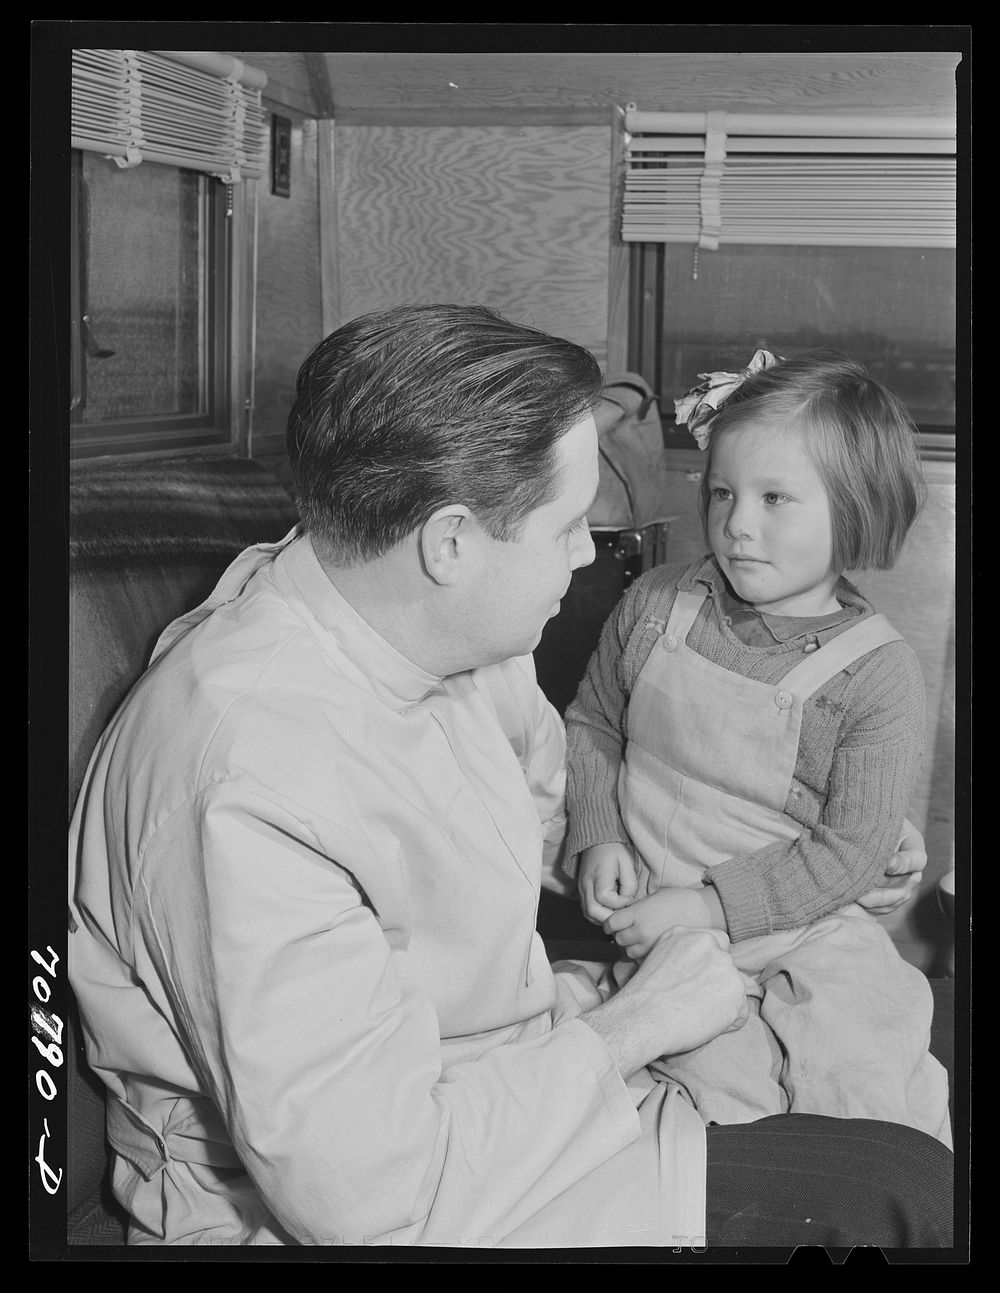 FSA (Farm Security Administration) dentist reassures migrant child who is making her first visit to a dentist. FSA dental…